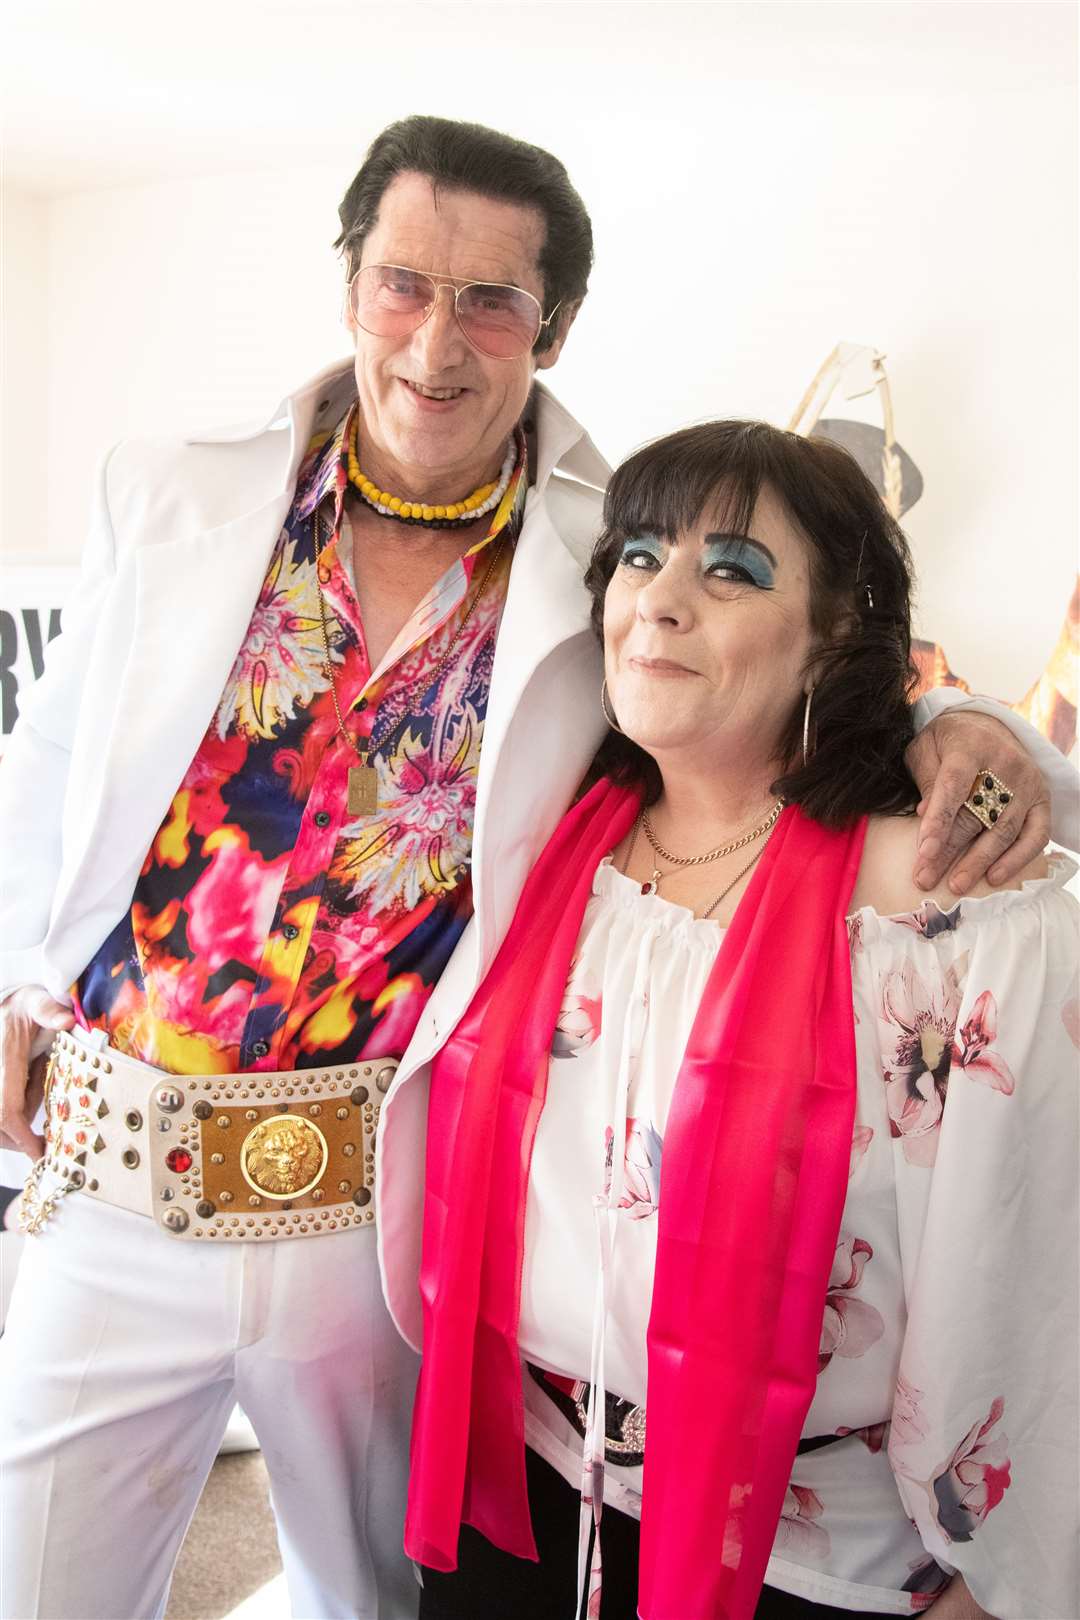 Gary Stuart, Elvis Tribute Artist, with fiancée Tina, ahead of his 60th birthday...Picture: Daniel Forsyth..